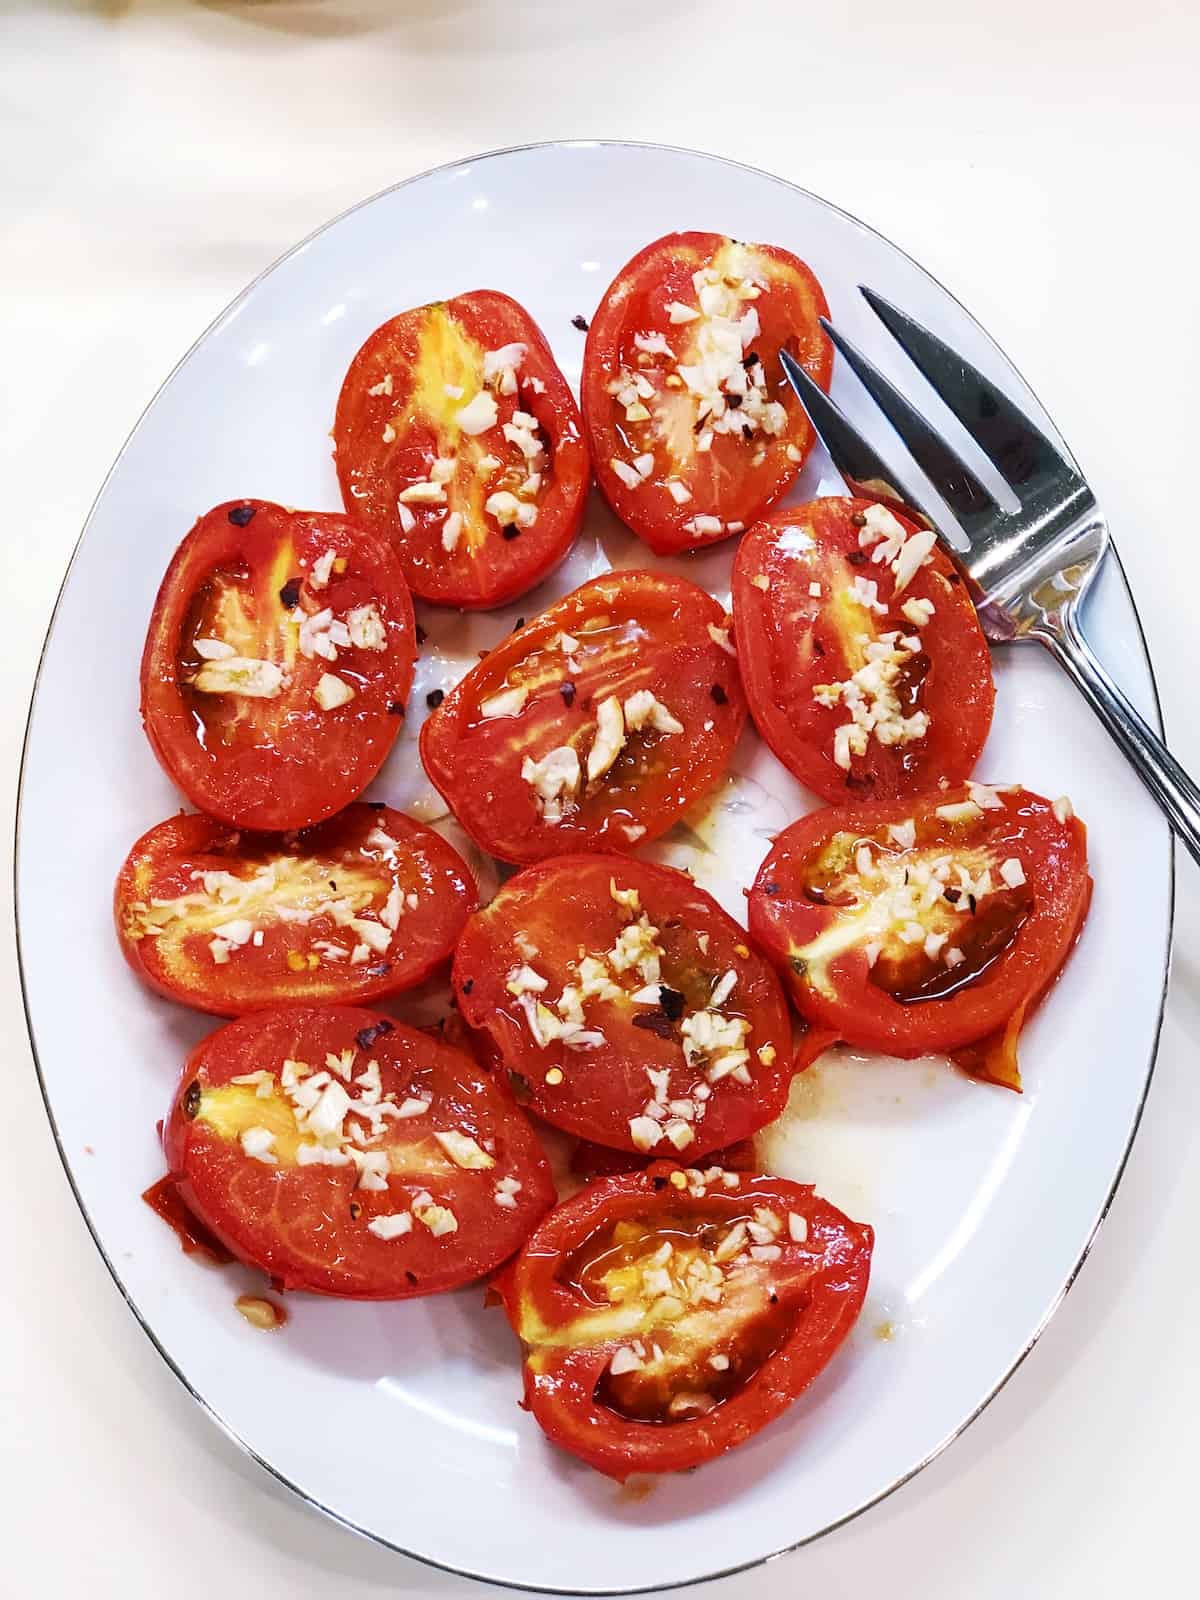 top view of roasted tomatoes